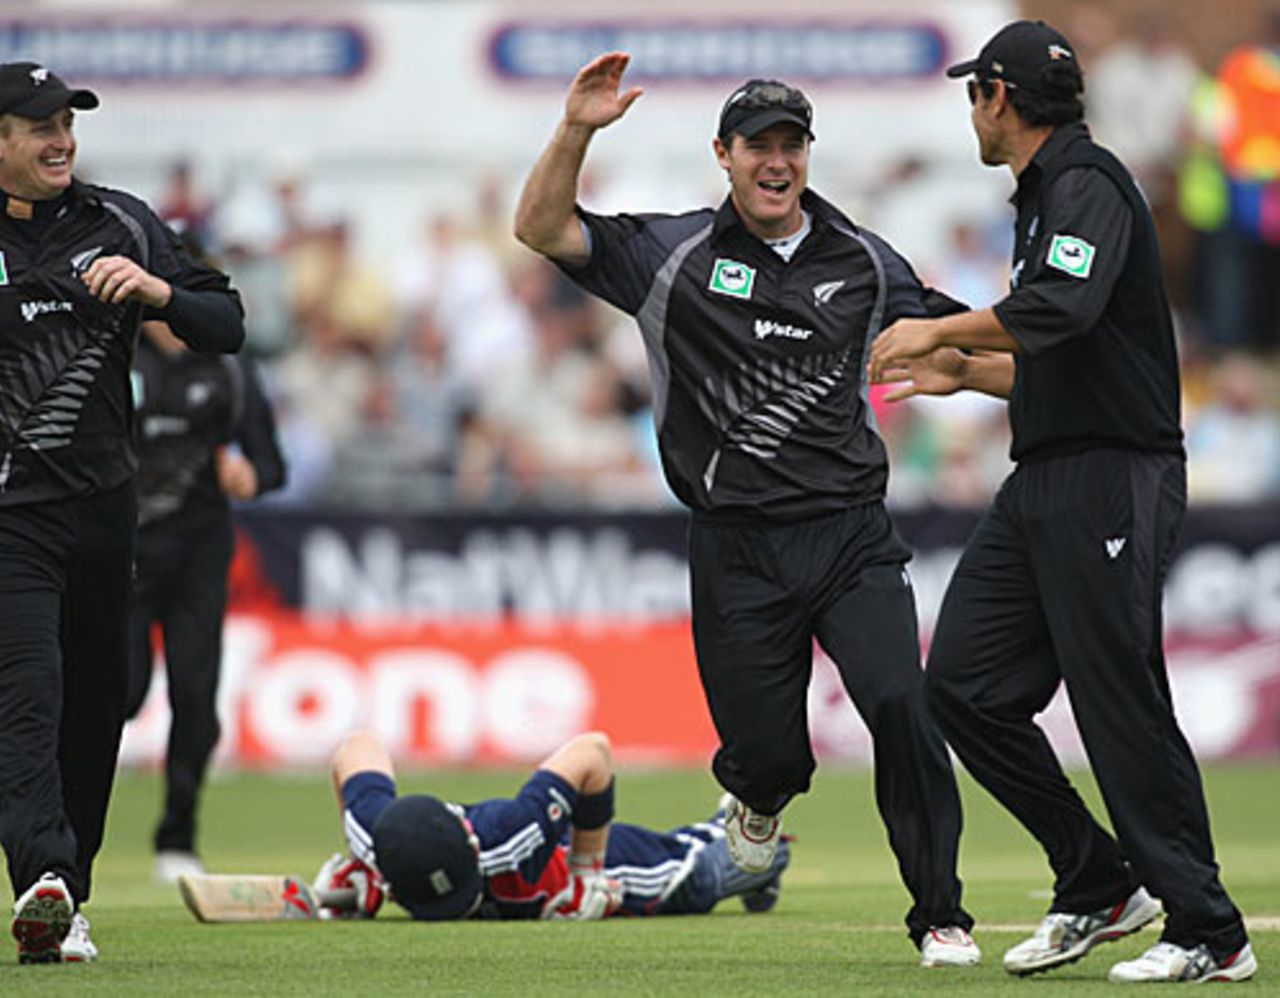 Ian Bell lies flat as New Zealand celebrate his run-out, England v New Zealand, 1st ODI, Chester-le-Street, June 15, 2008